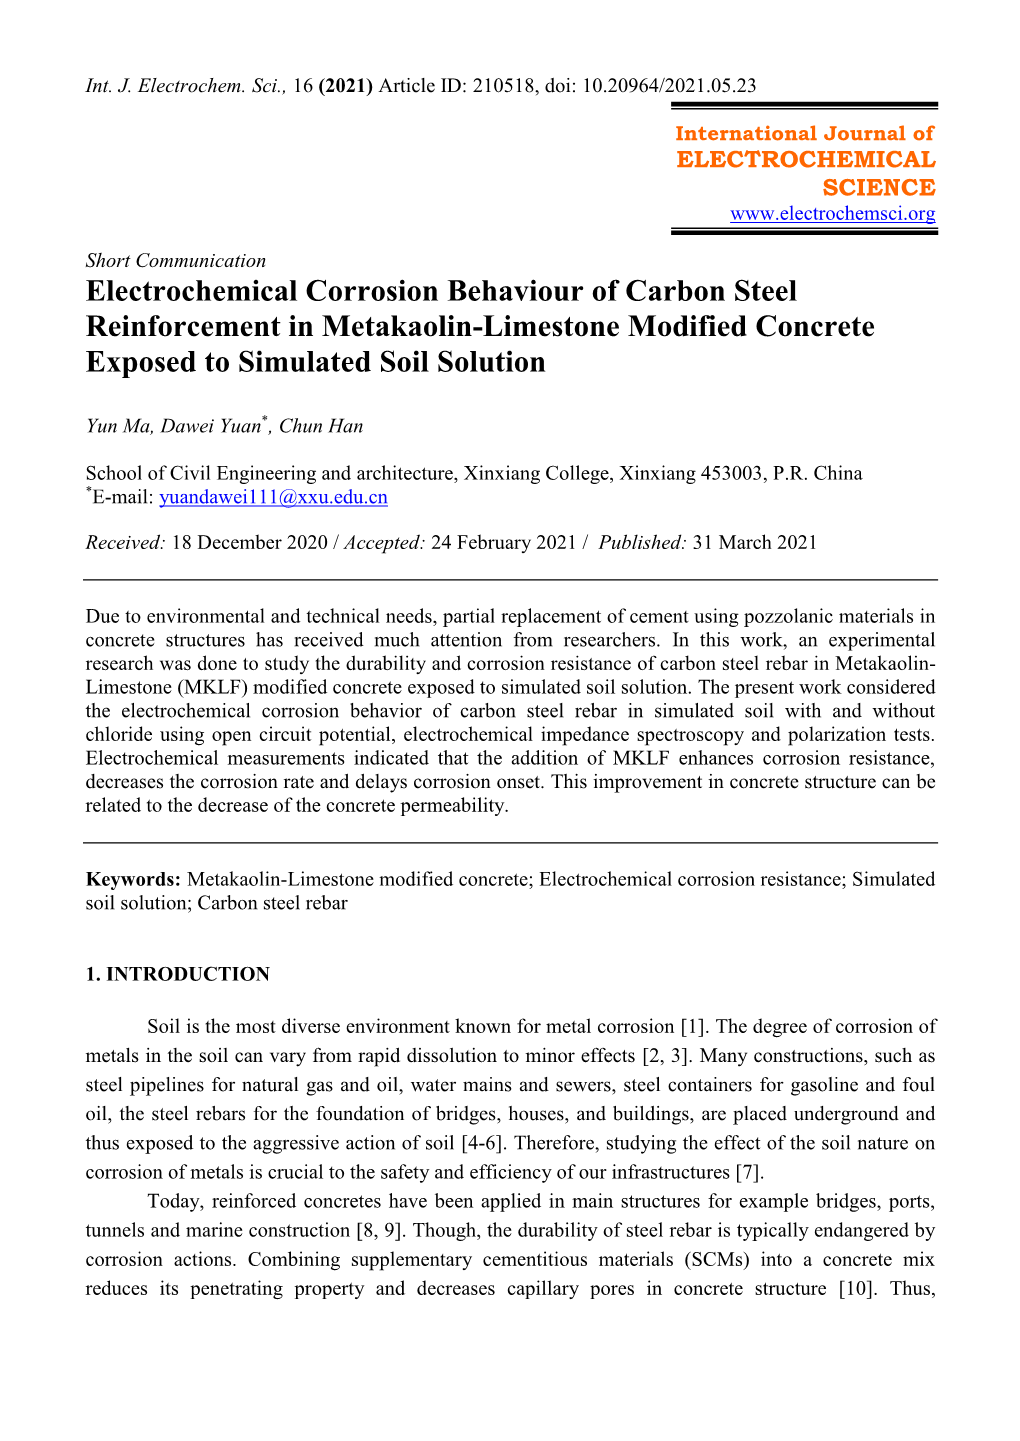 Electrochemical Corrosion Behaviour of Carbon Steel Reinforcement in Metakaolin-Limestone Modified Concrete Exposed to Simulated Soil Solution